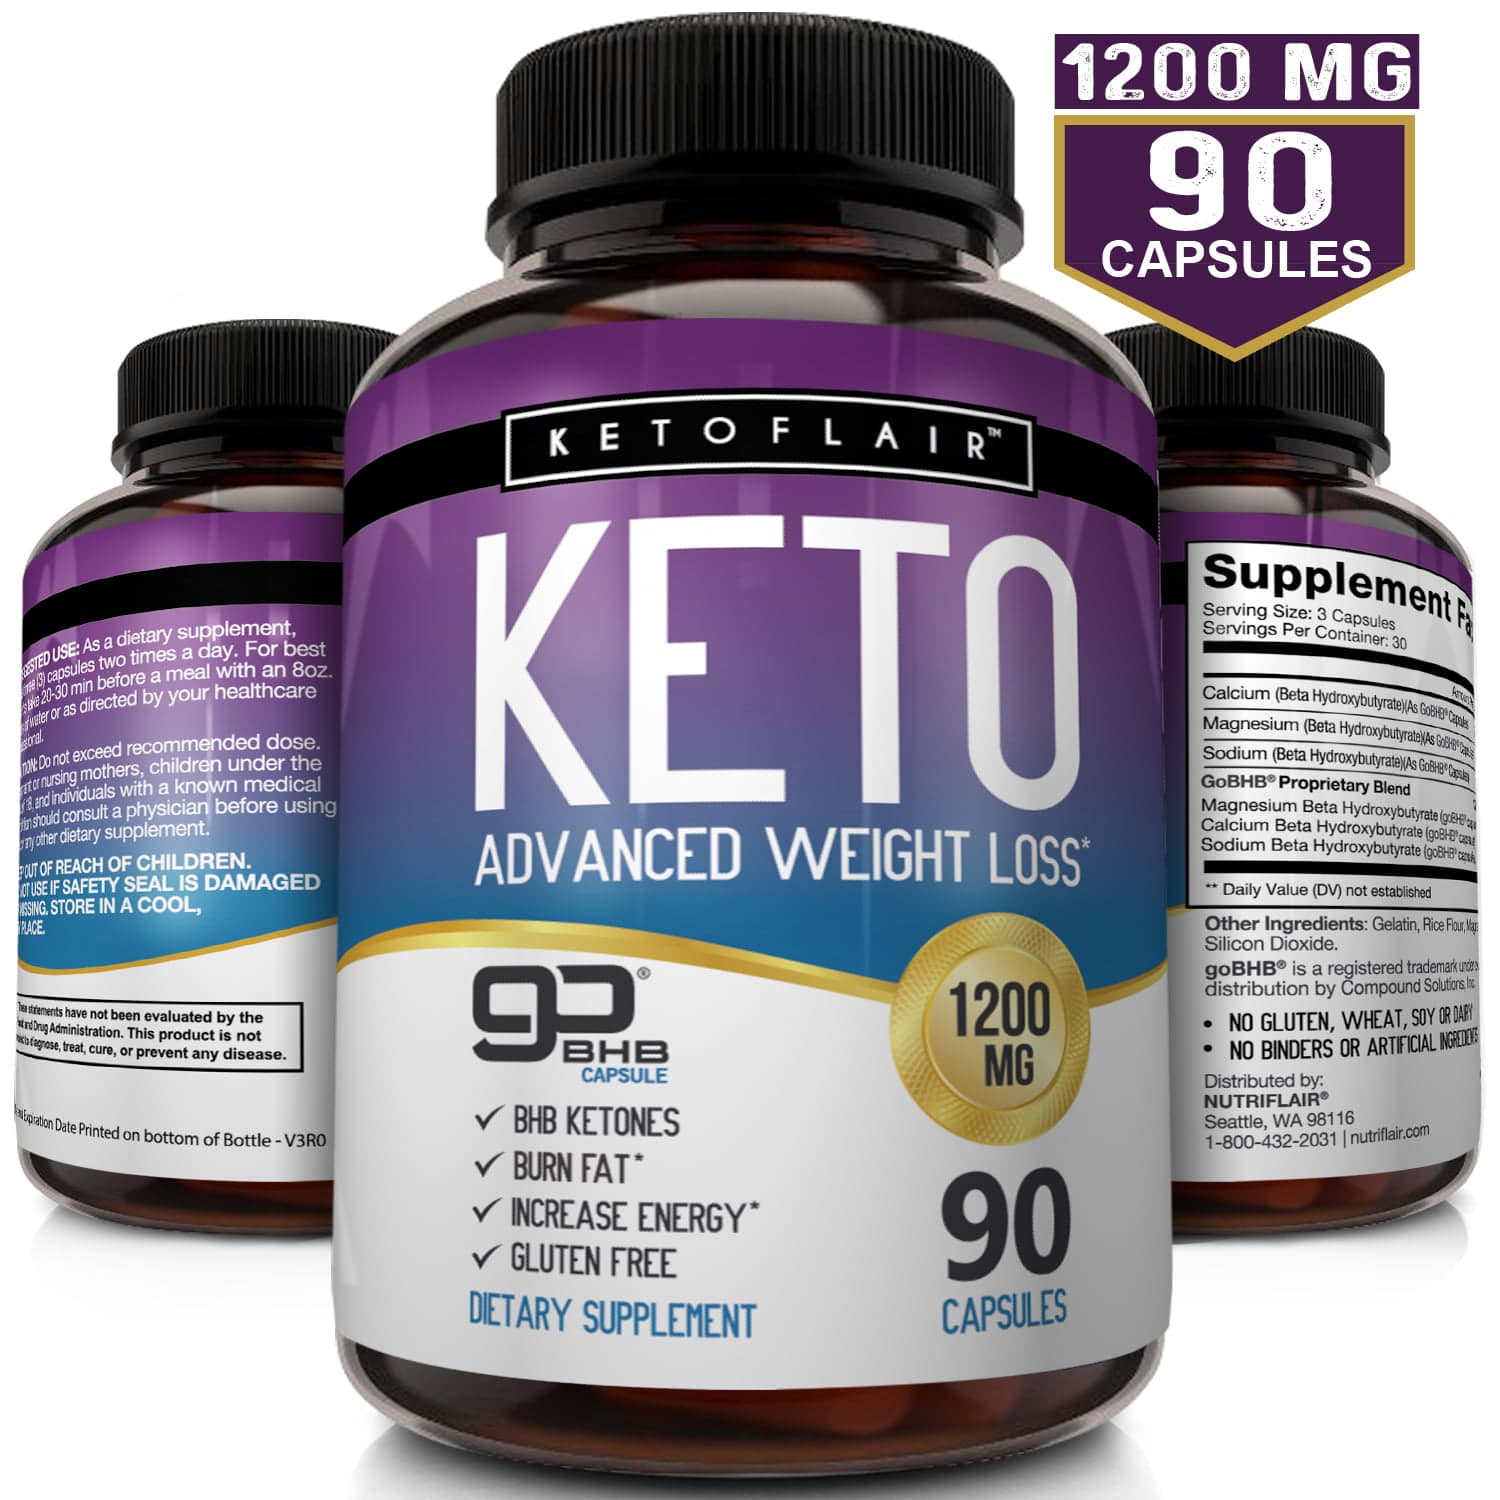 NutriFlair Keto Advanced Weight Loss Supplement, 1200 mg, 90 Capsules ...